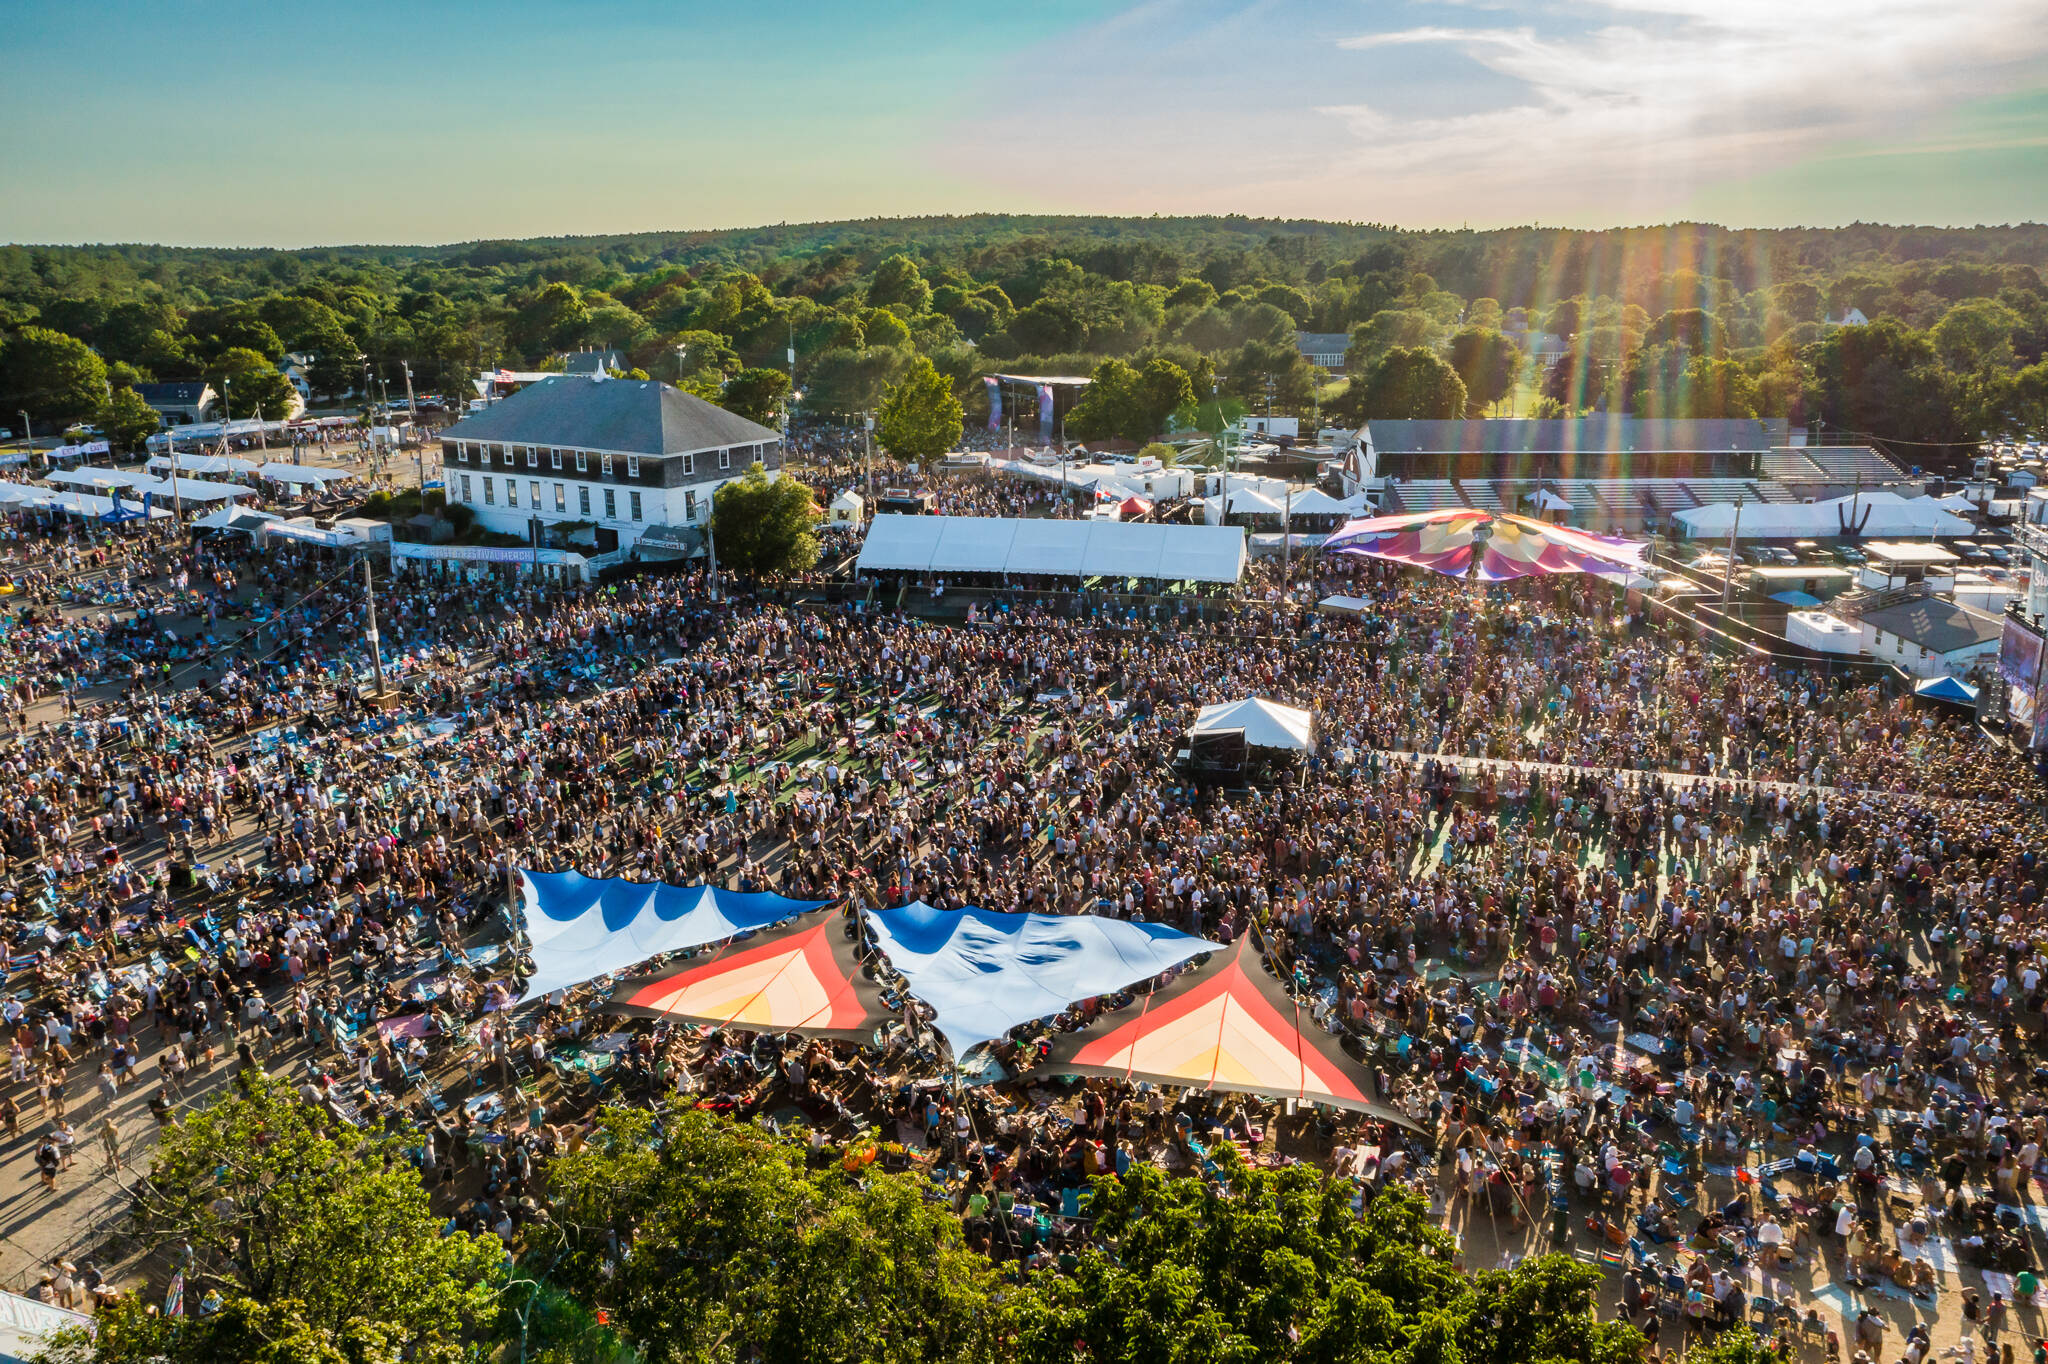 The view from above at Levitate Festival 2022. (Courtesy Jesse Faatz)